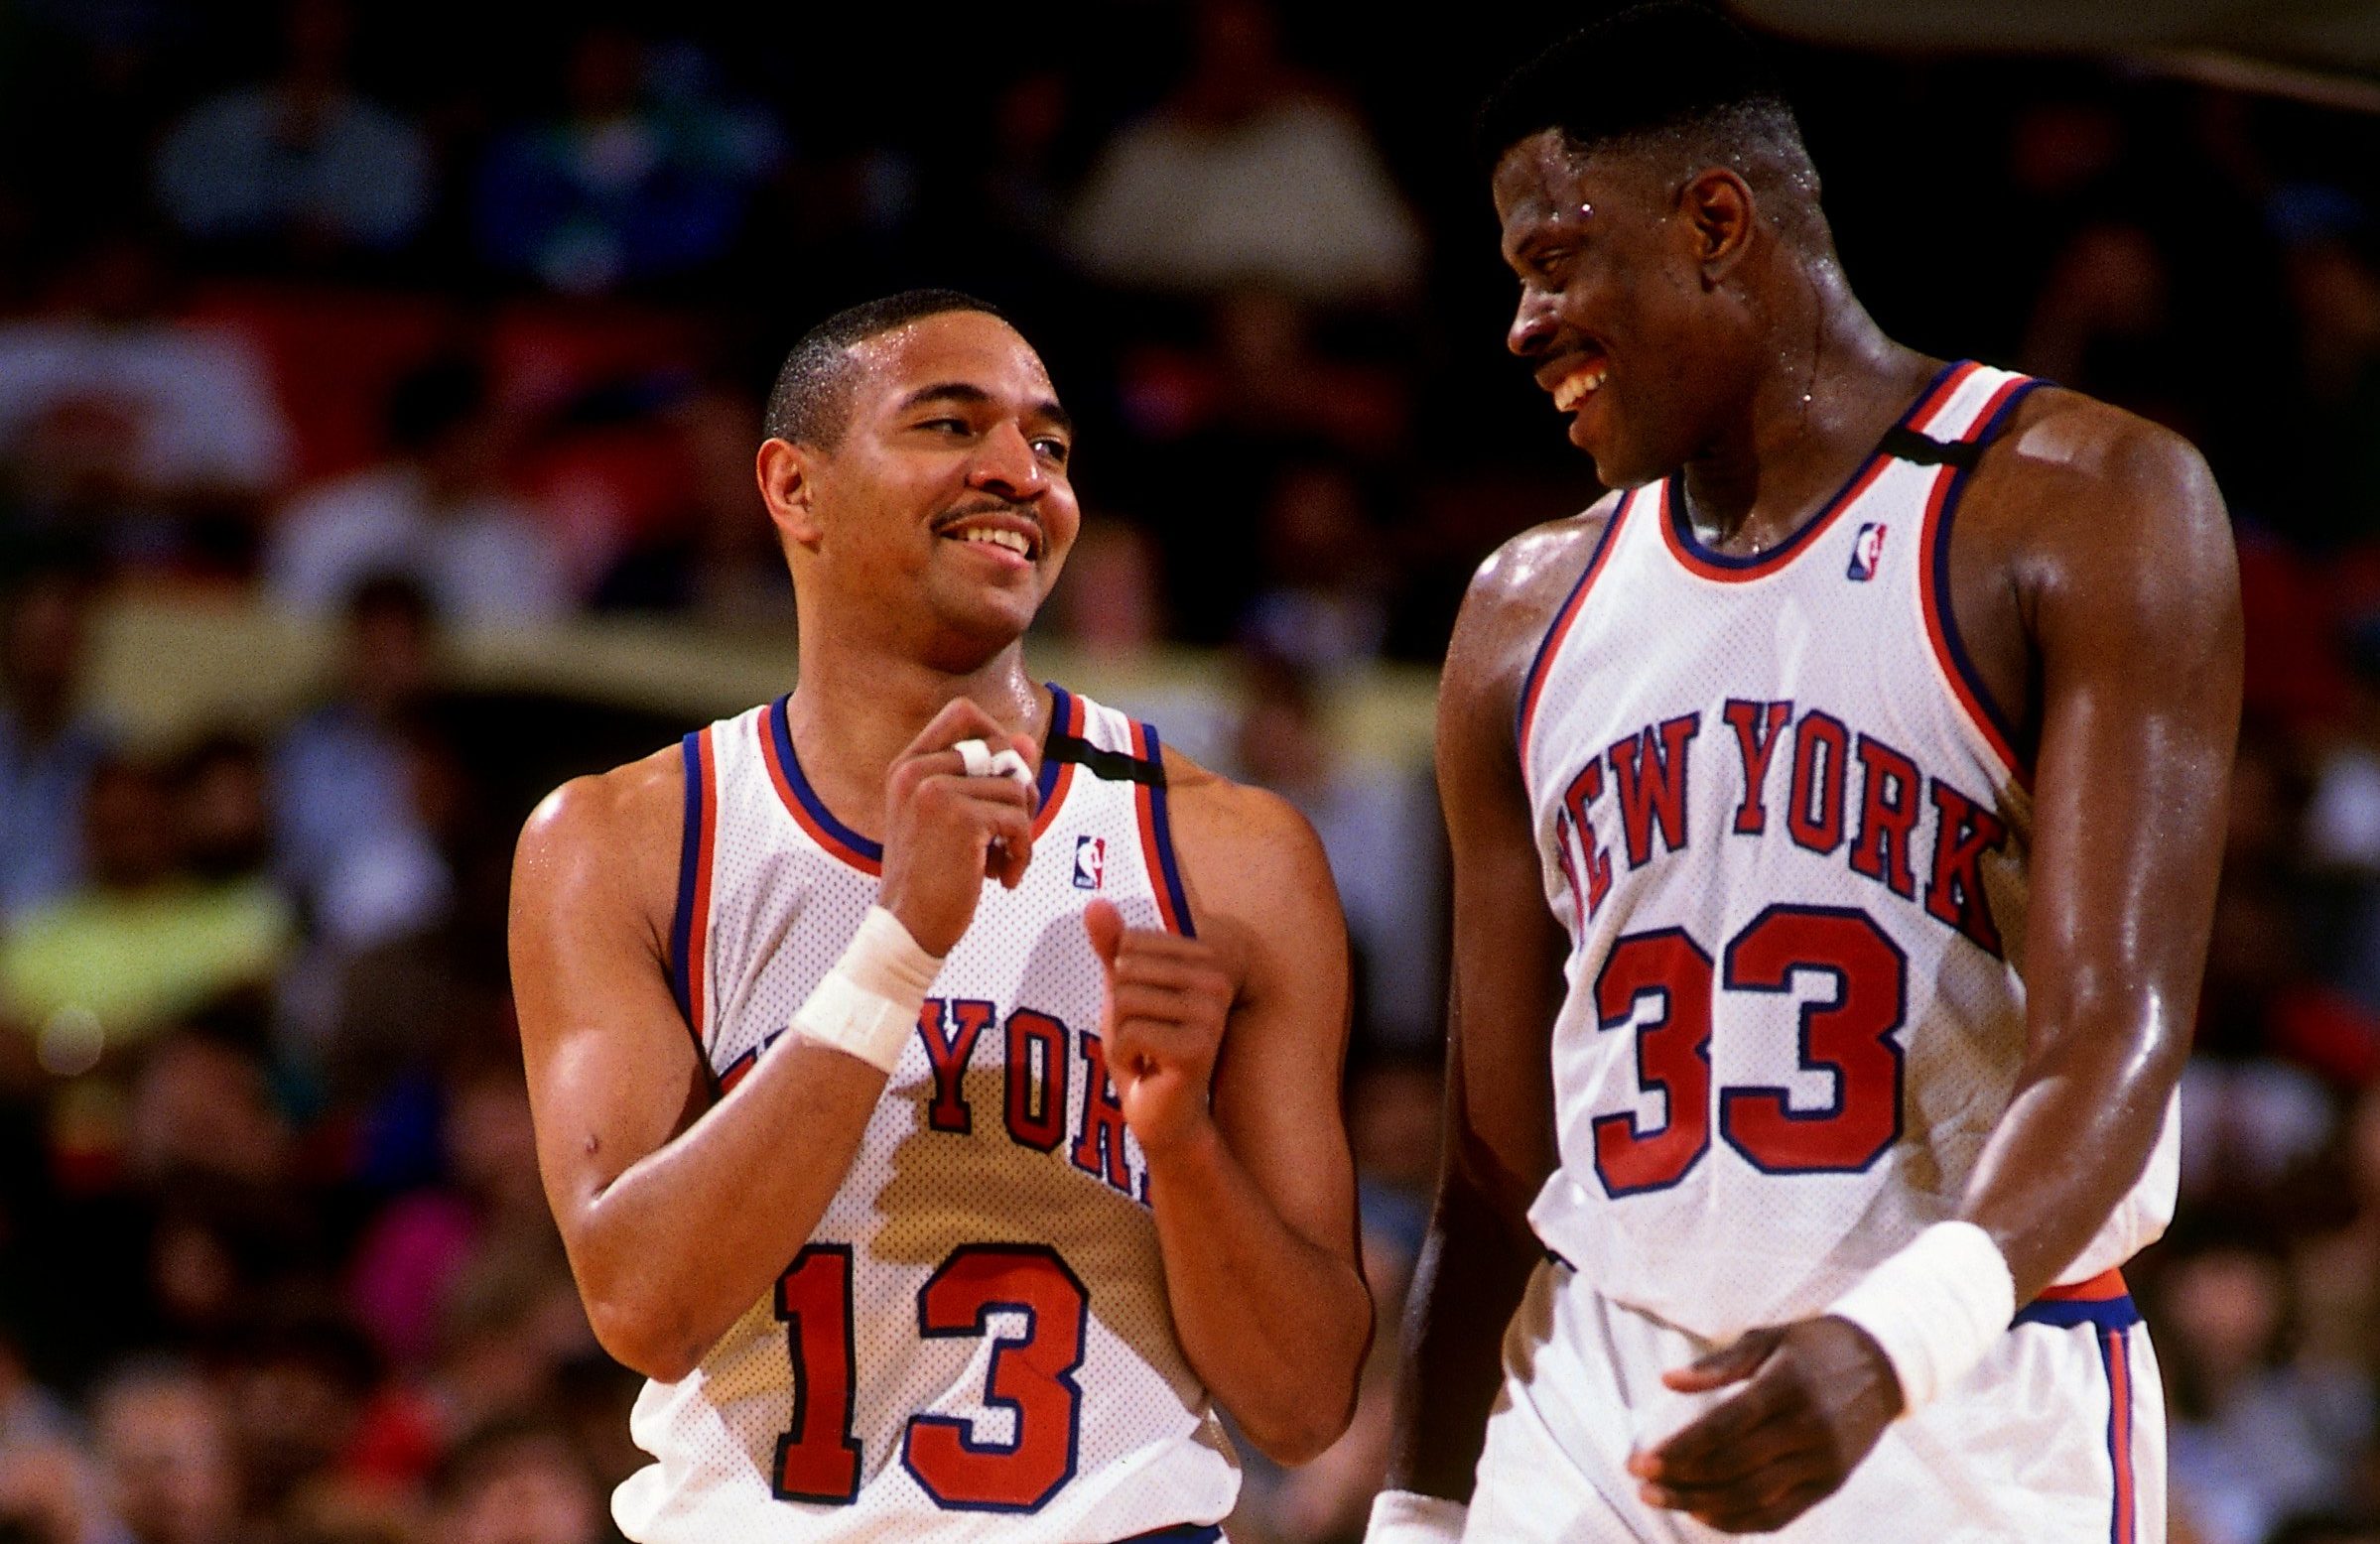 NEW YORK - 1990: Patrick Ewing #33 of the New York Knicks chats with teammate Mark Jackson #13 circa 1990 at Madison Square Garden in New York, New York. NOTE TO USER: User expressly acknowledges that, by downloading and or using this photograph, User is consenting to the terms and conditions of the Getty Images License agreement. Mandatory Copyright Notice: Copyright 1990 NBAE (Photo by Nathaniel S. Butler/NBAE via Getty Images)